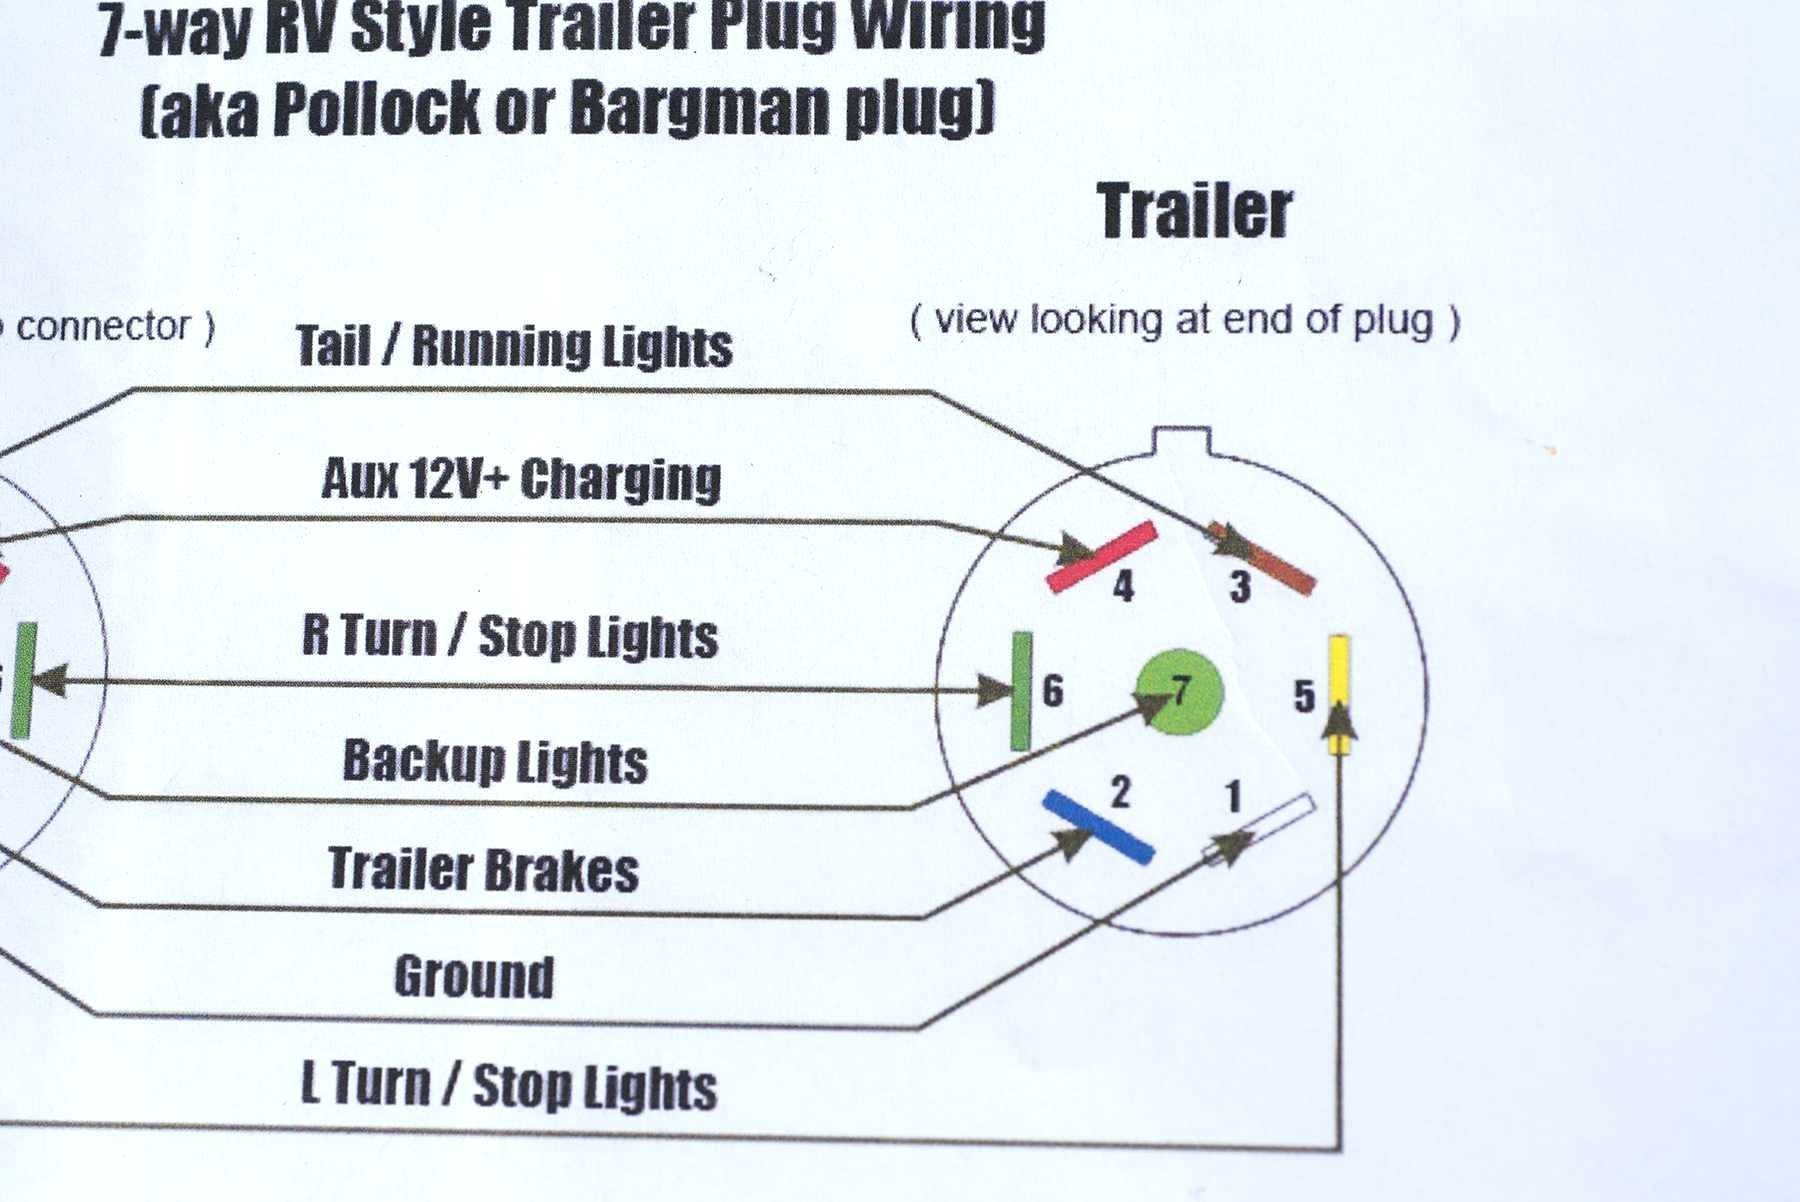 Chevy Trailer Wiring Harness Diagram 7 Pin To 4 | Wiring Diagram - Chevy 7 Pin Trailer Wiring Diagram